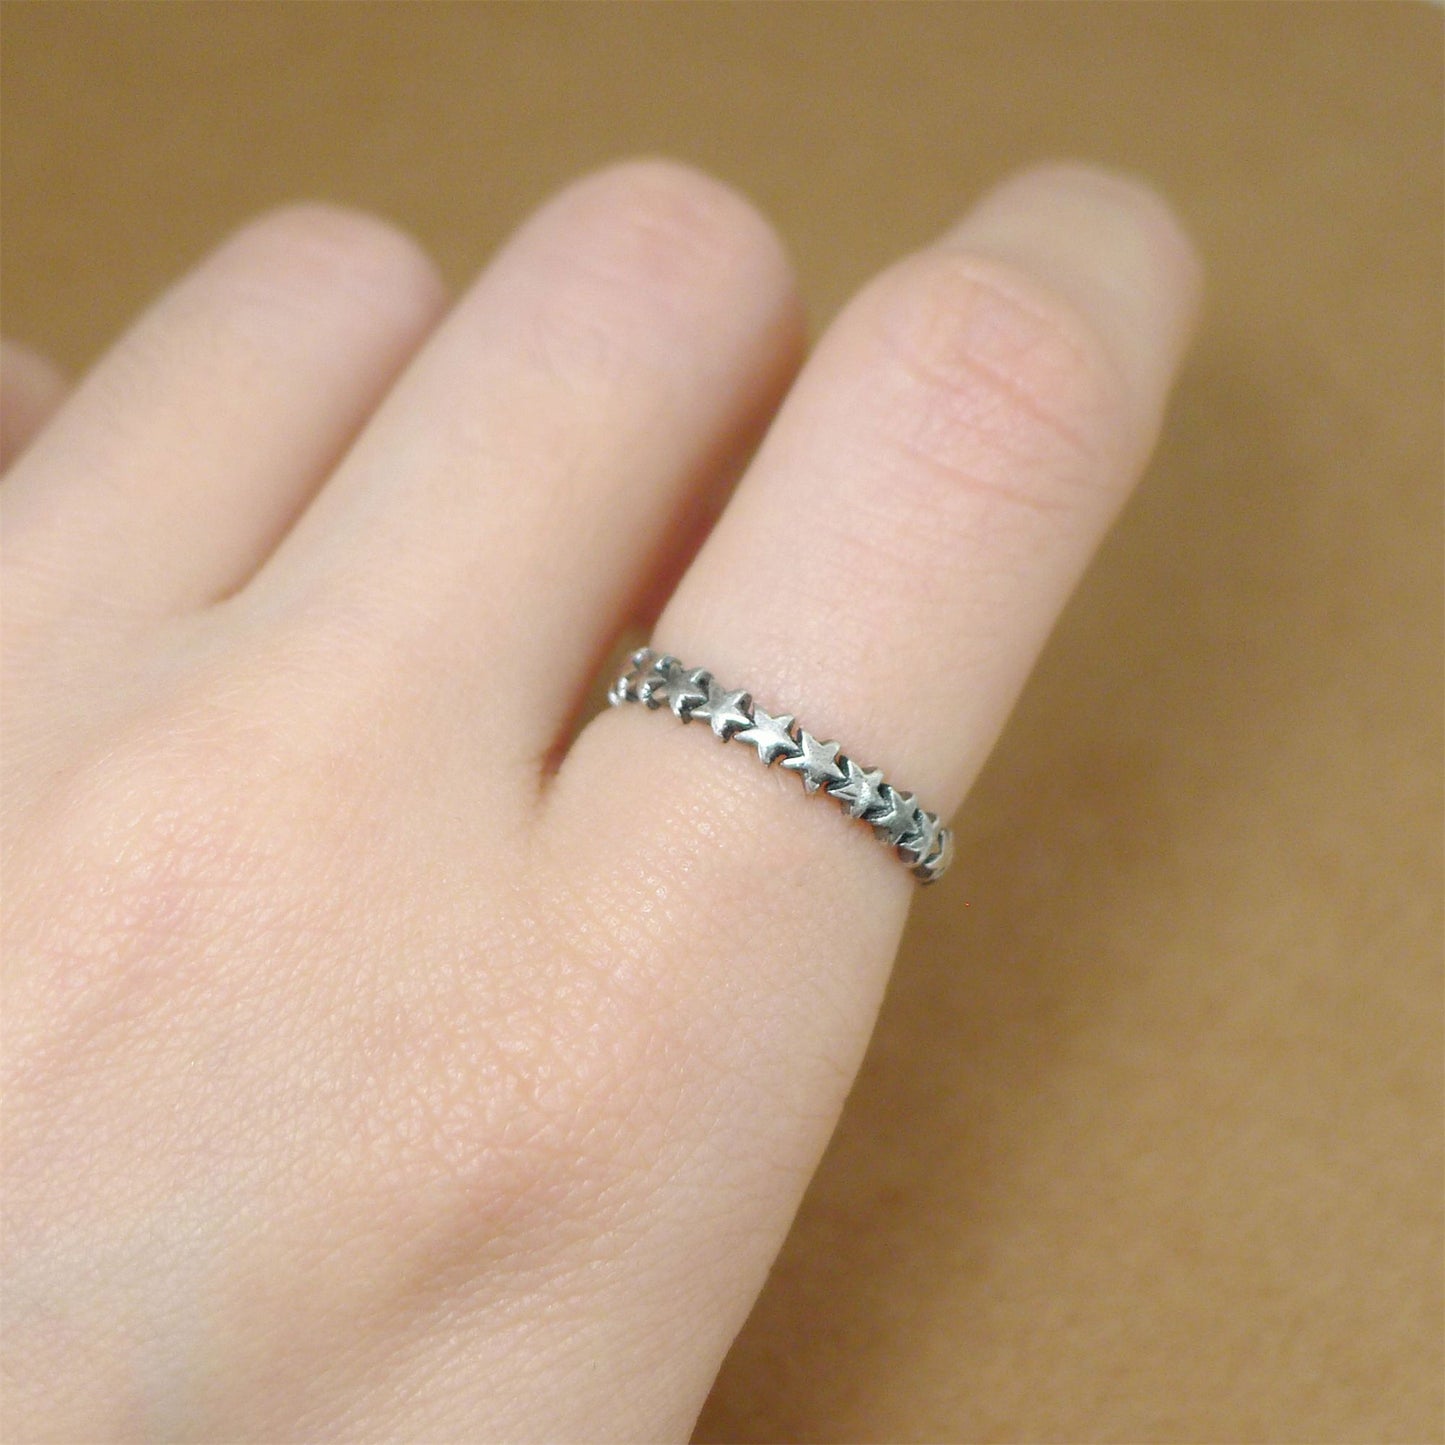 Sterling Silver Oxidized Linked Stars Knuckle Stack Ring Open Band - sugarkittenlondon